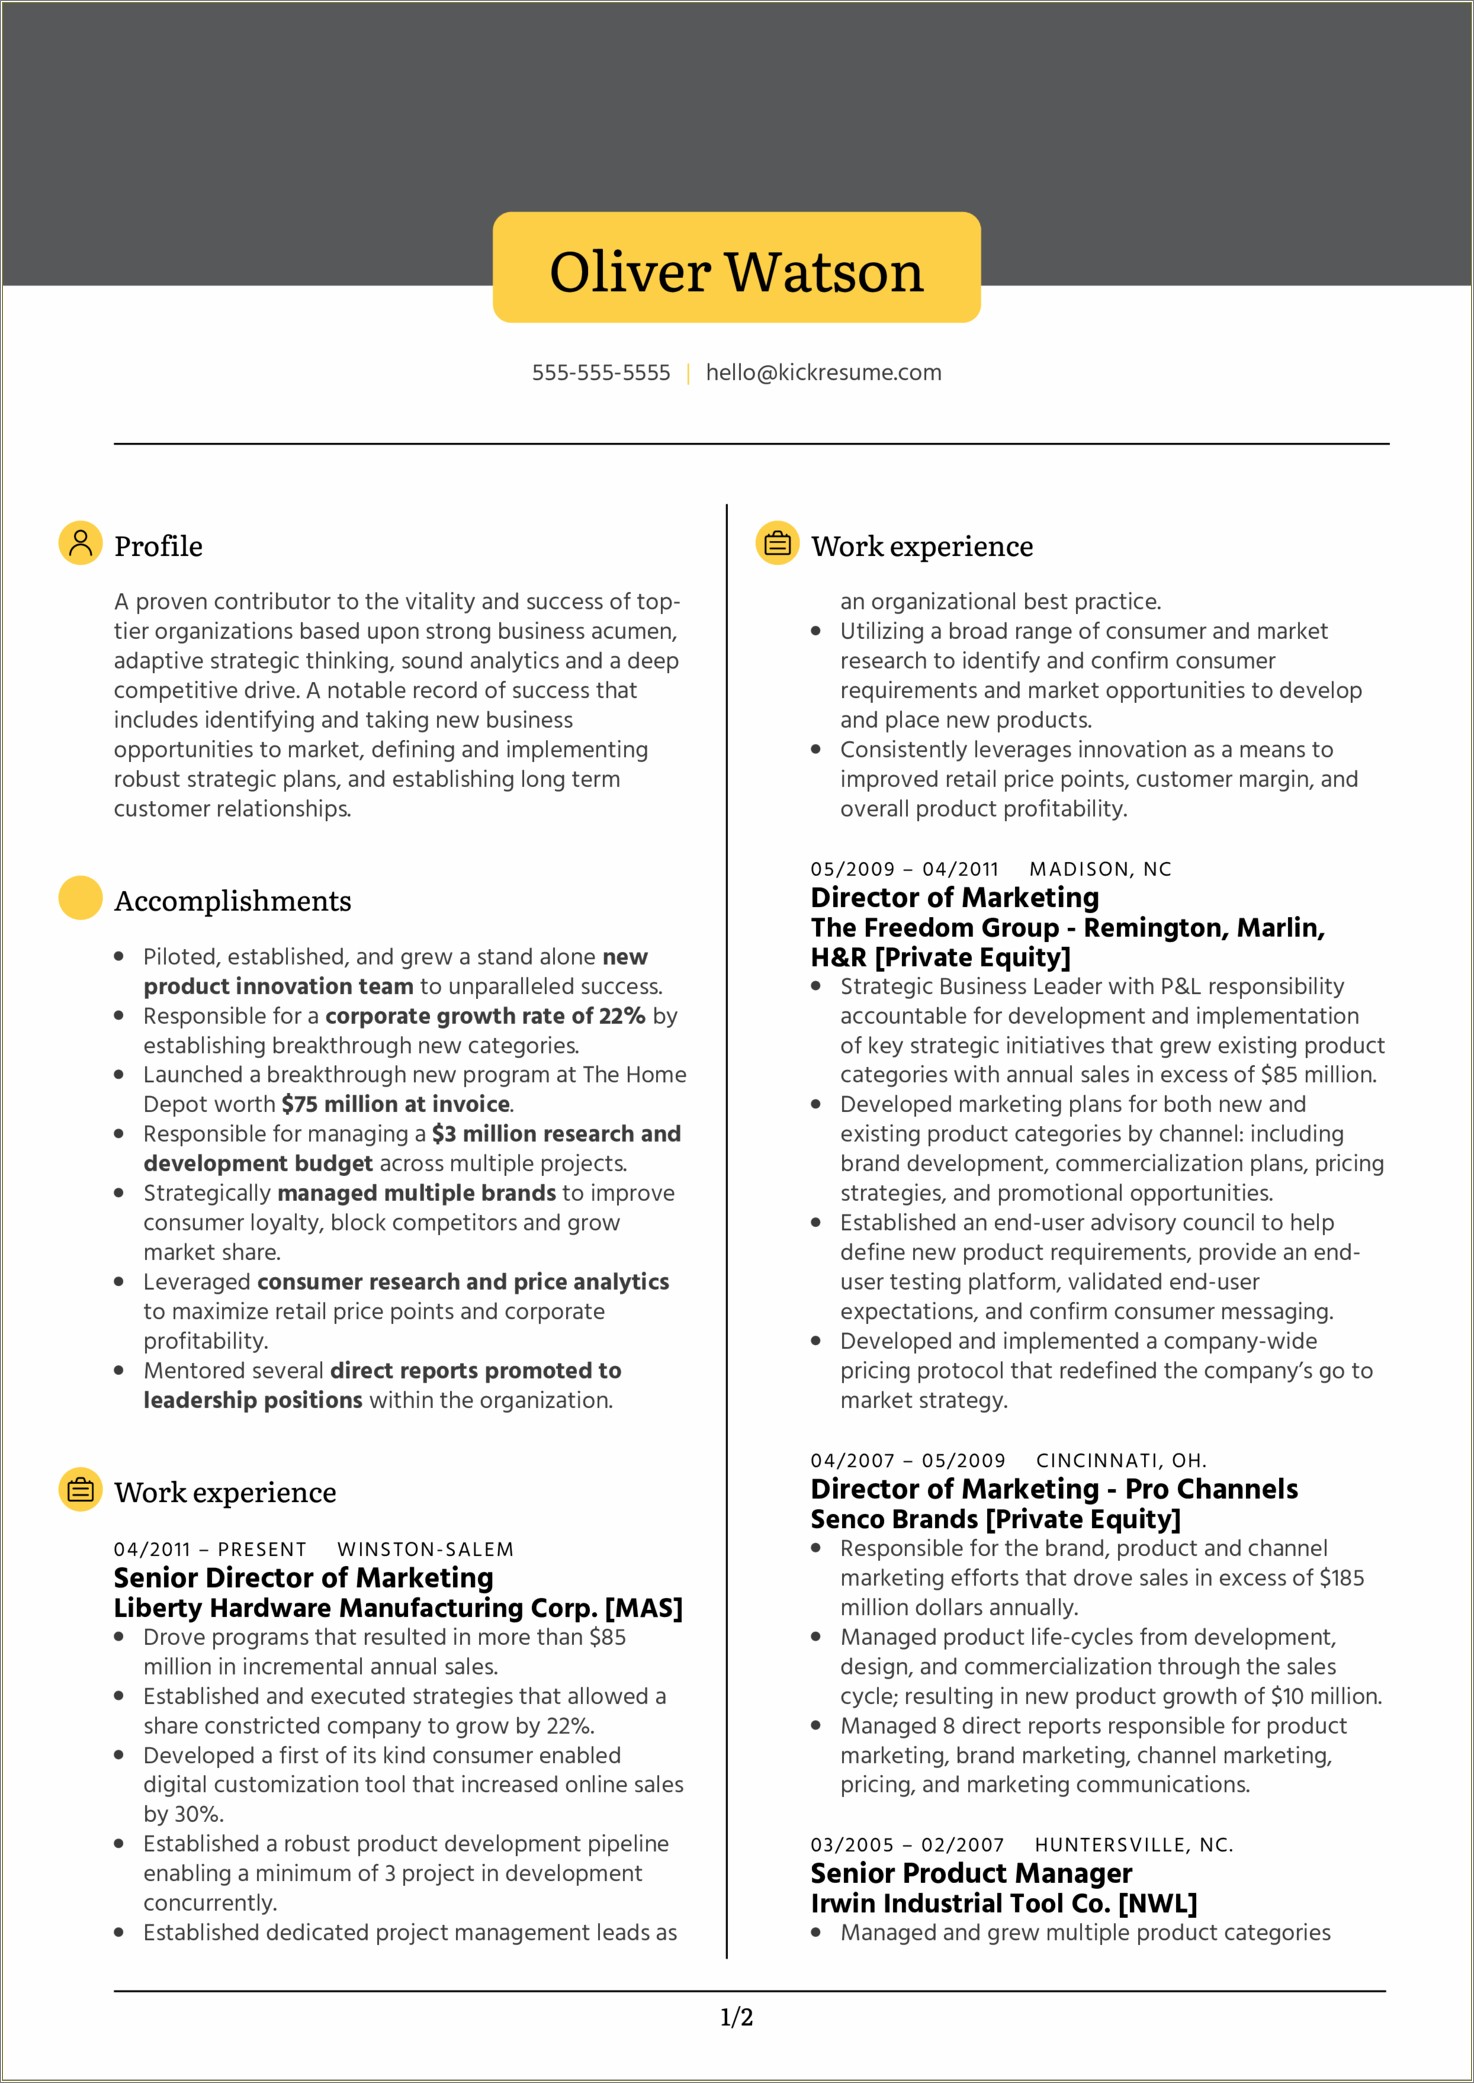 Best Things For Private Equity Resume